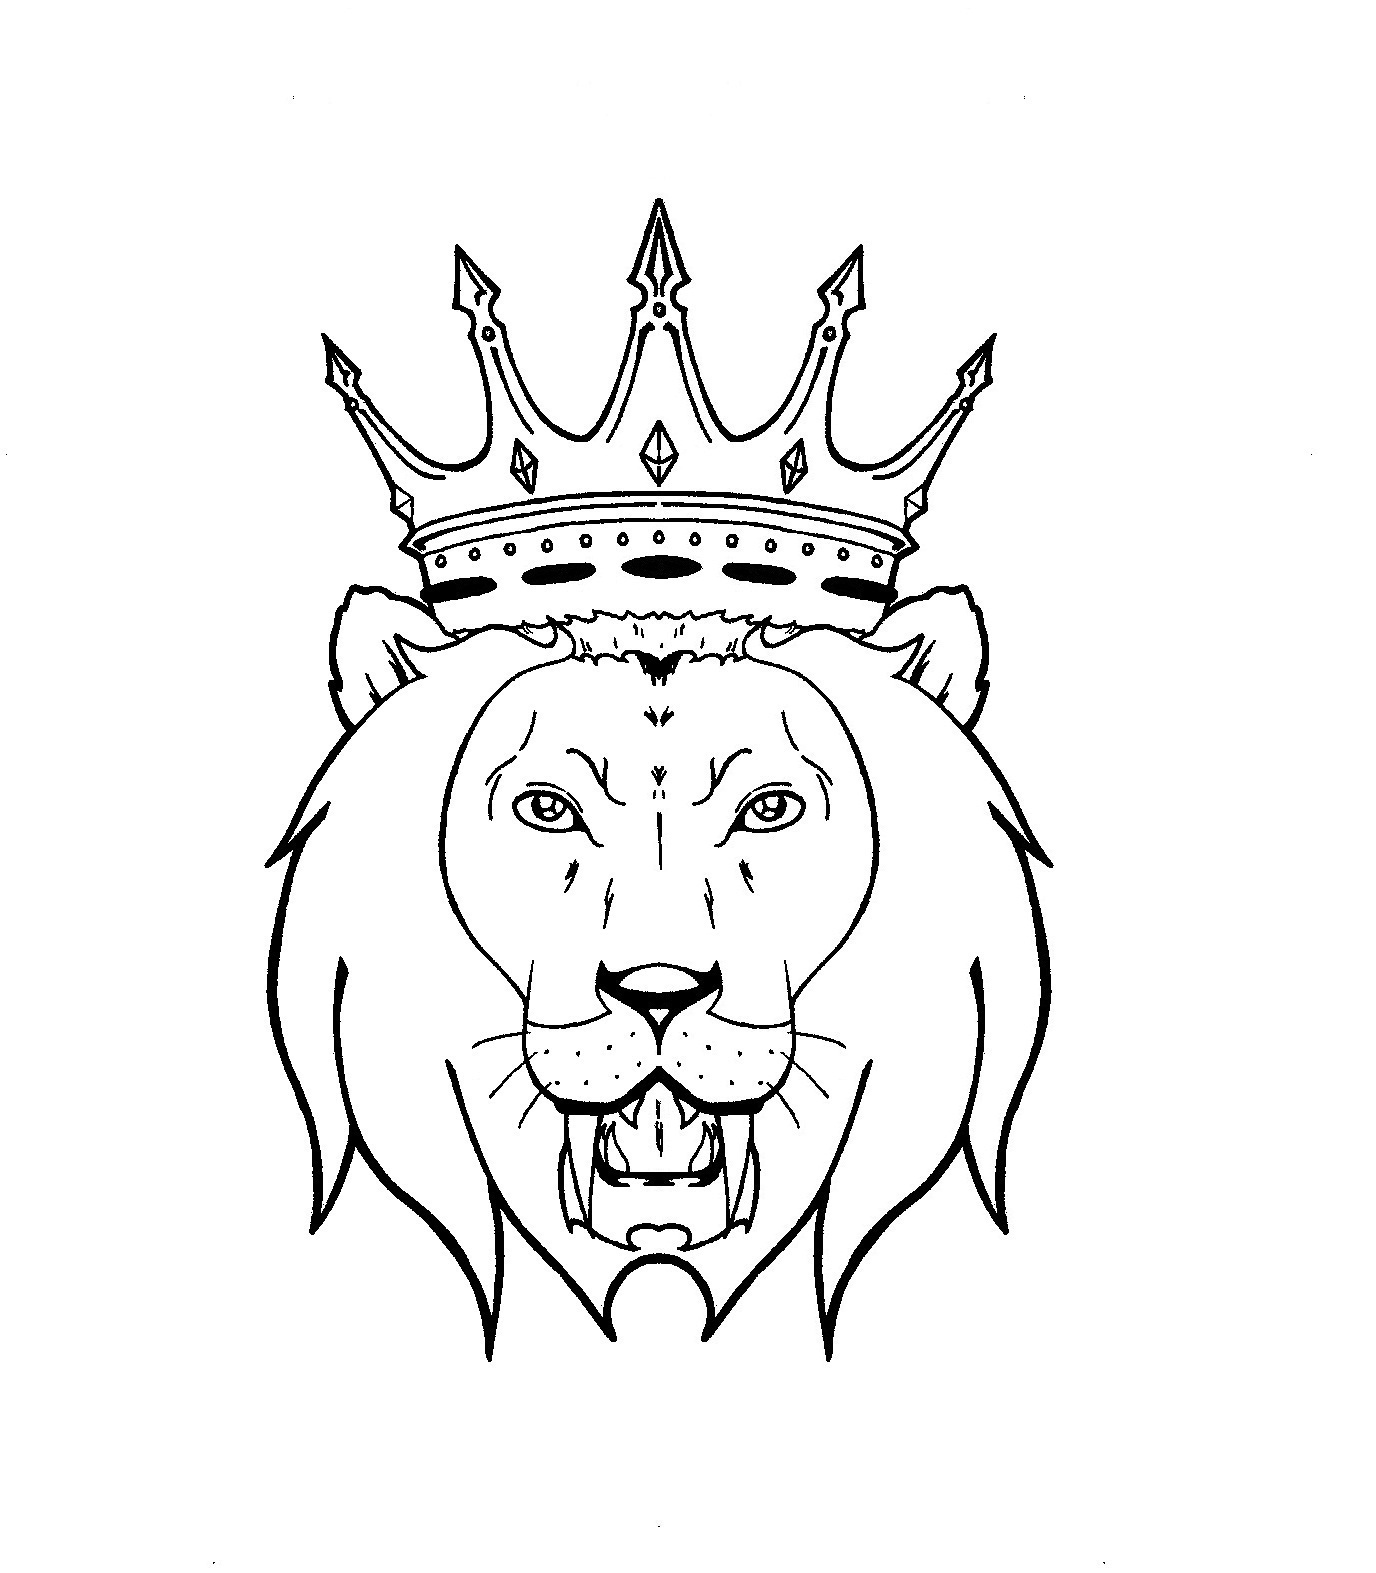 outline of lion head with crown.